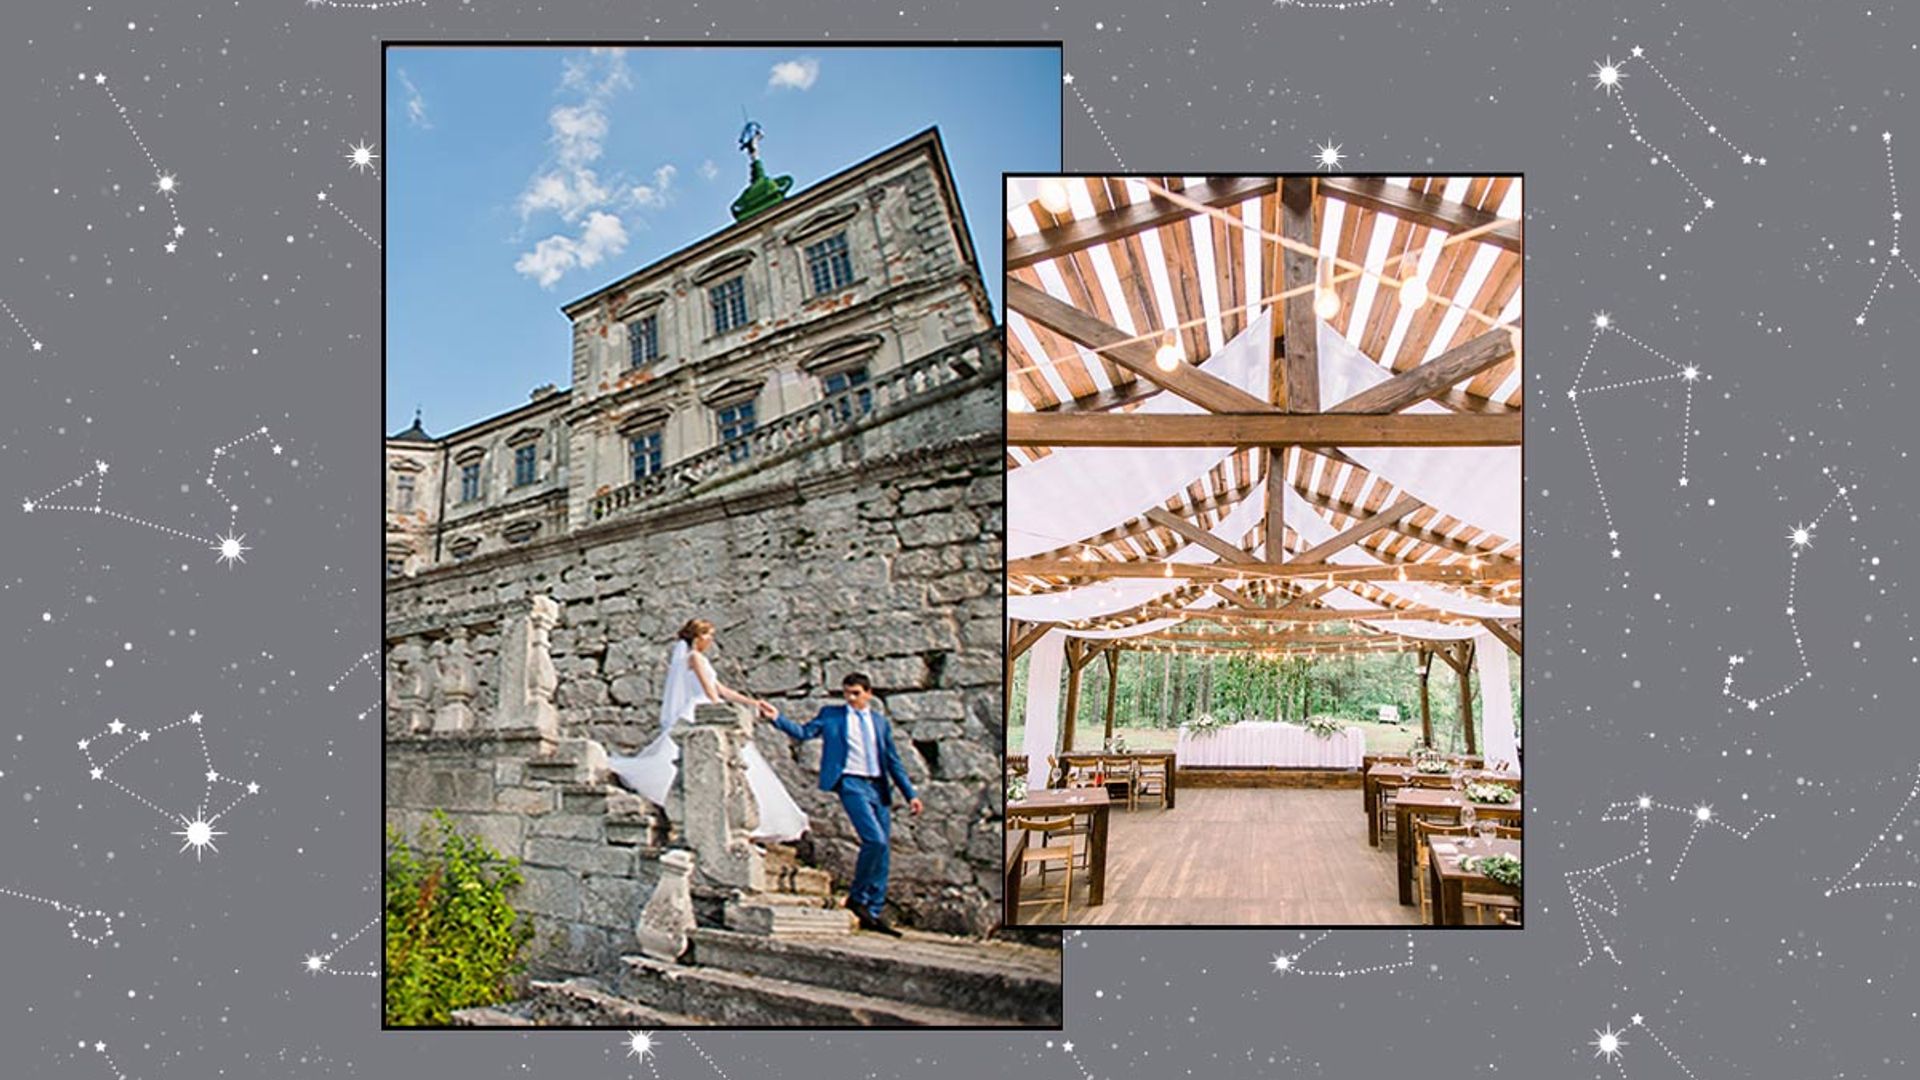 Calling zodiac brides! 12 gorgeous wedding venues for your star sign